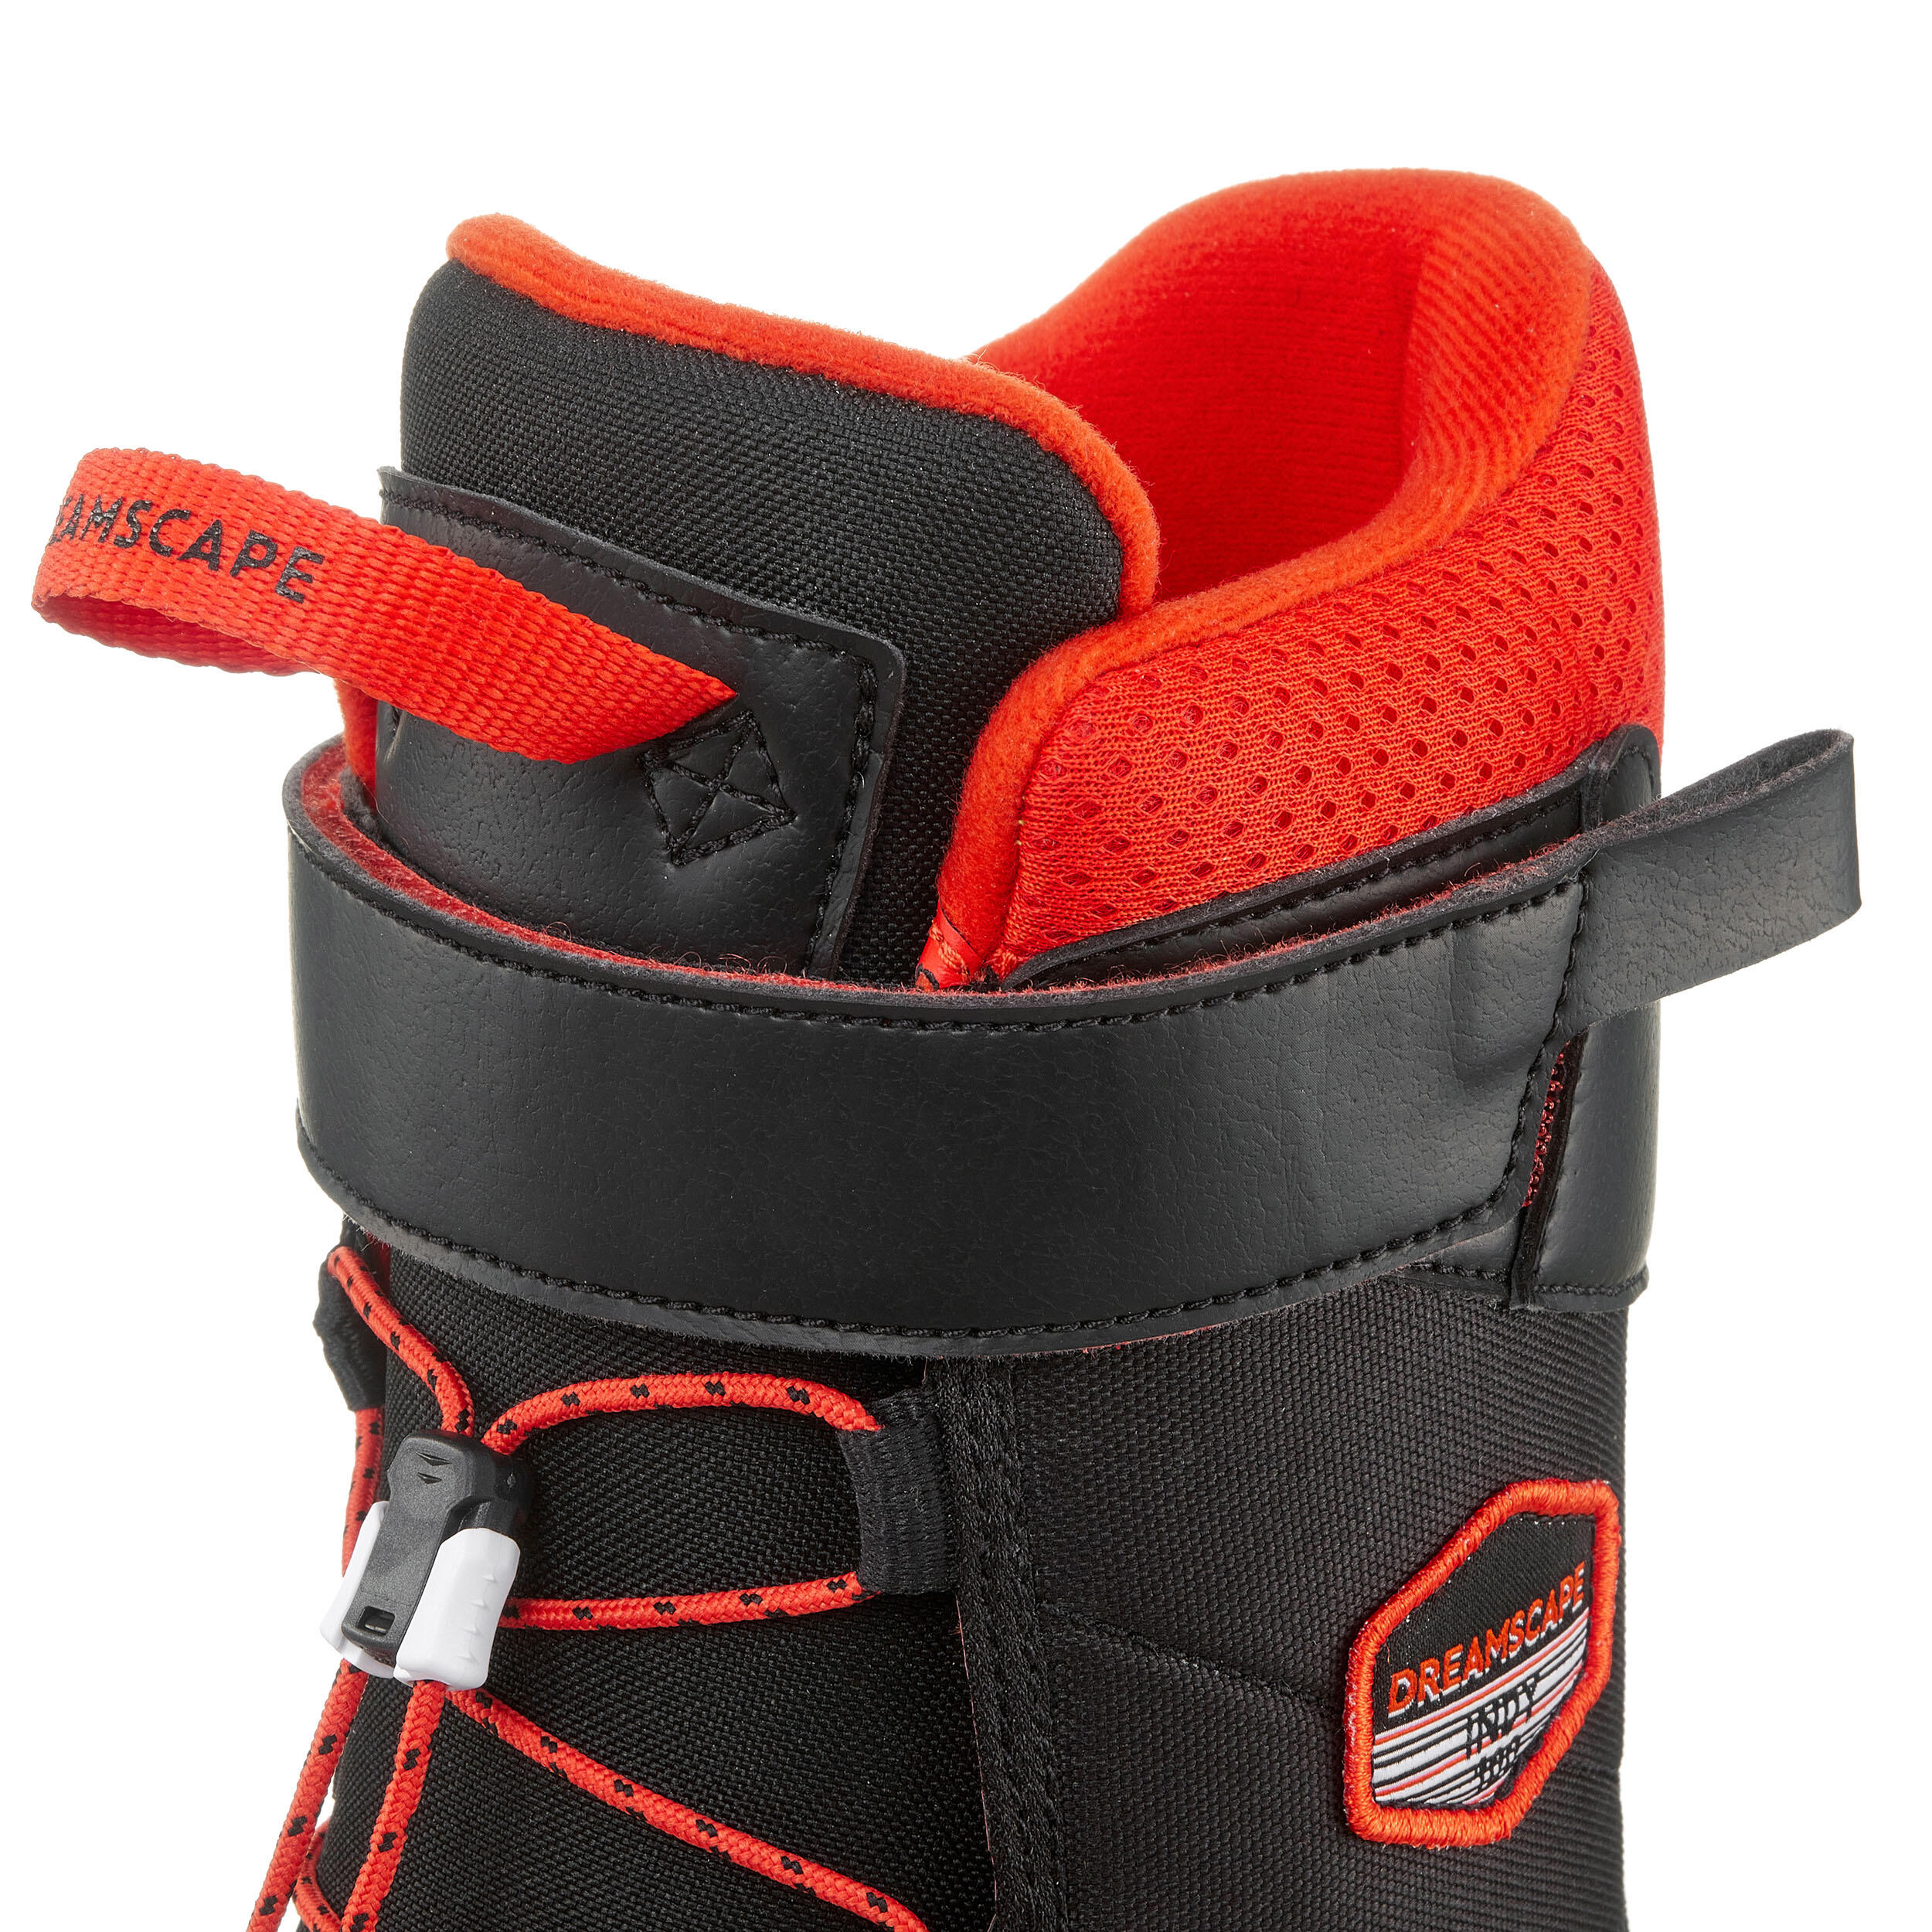 Kids’ Quick Fastening Snowboard Boots - Indy 100 - S 7/9